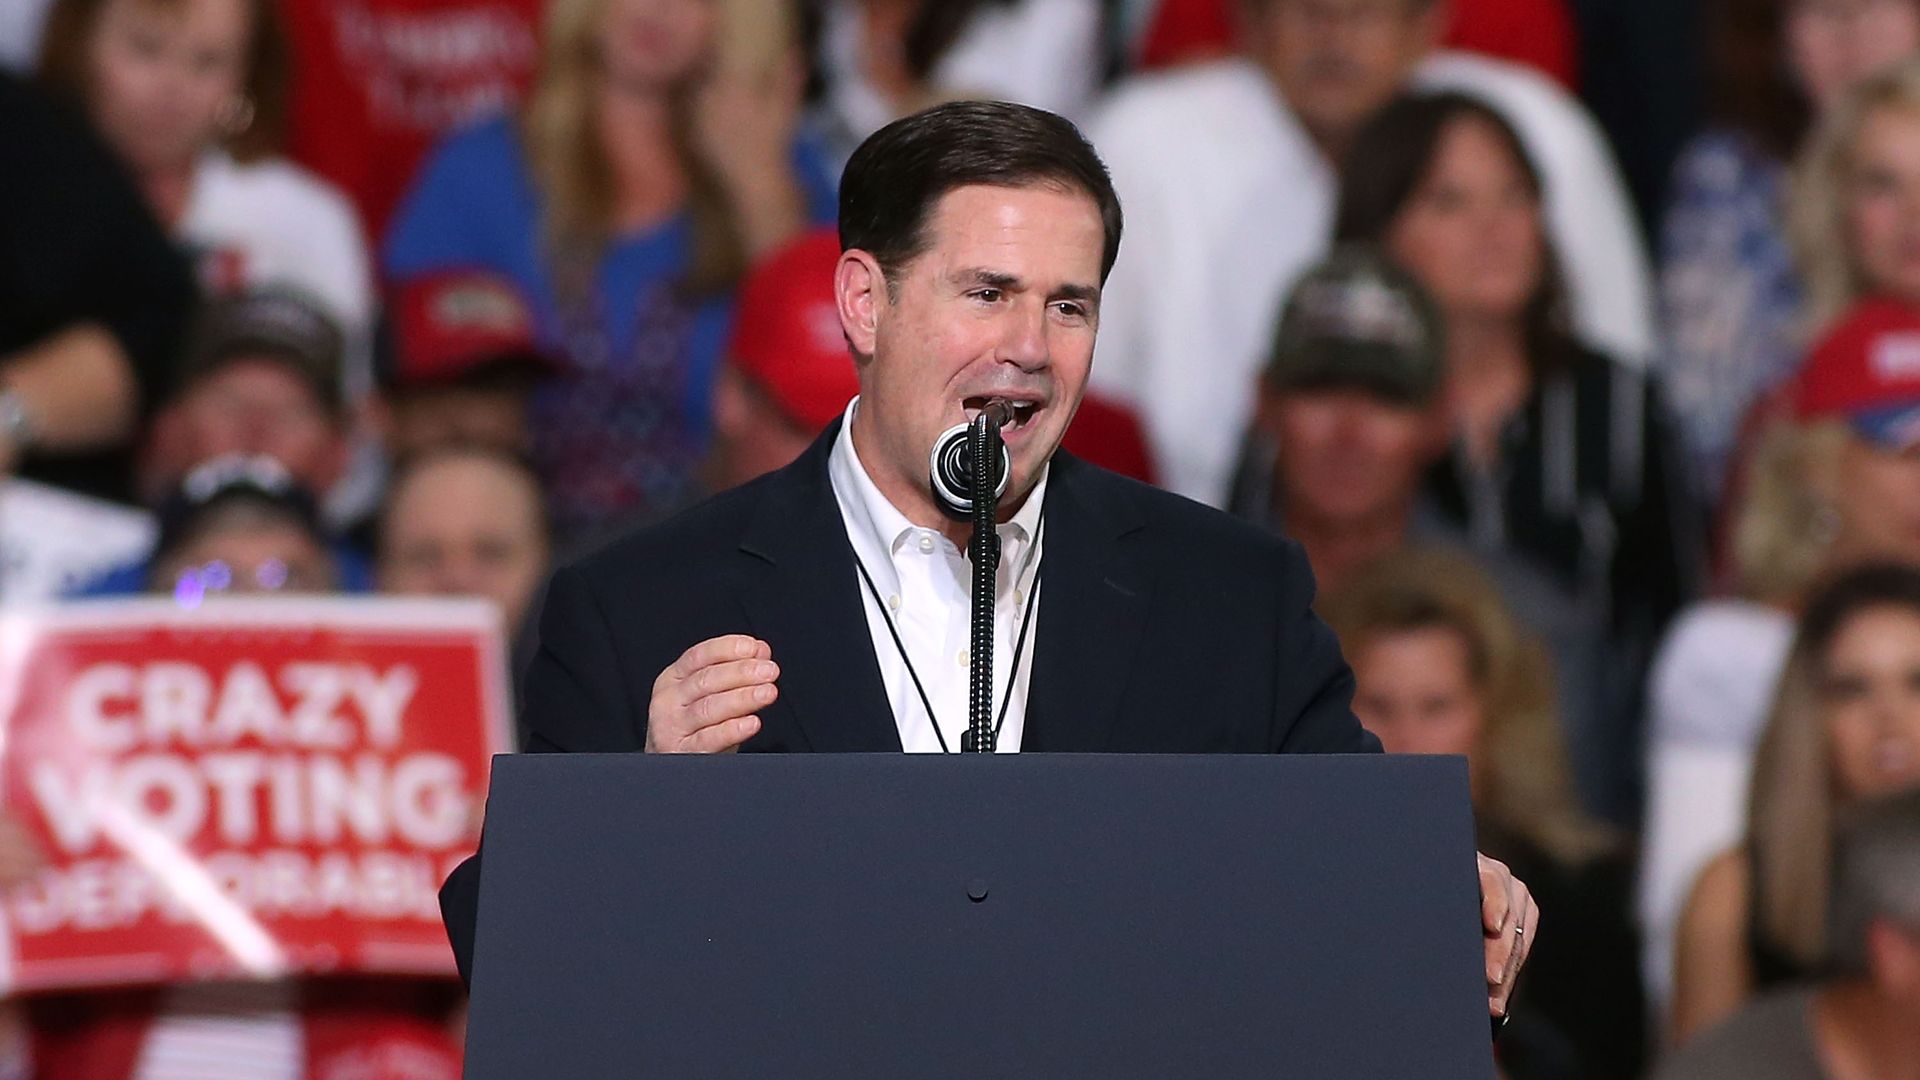 Arizona Gov. Doug Ducey speaks during a rally for President Donald Trump at the International Air Response facility on October 19, 2018 in Mesa, Arizona.